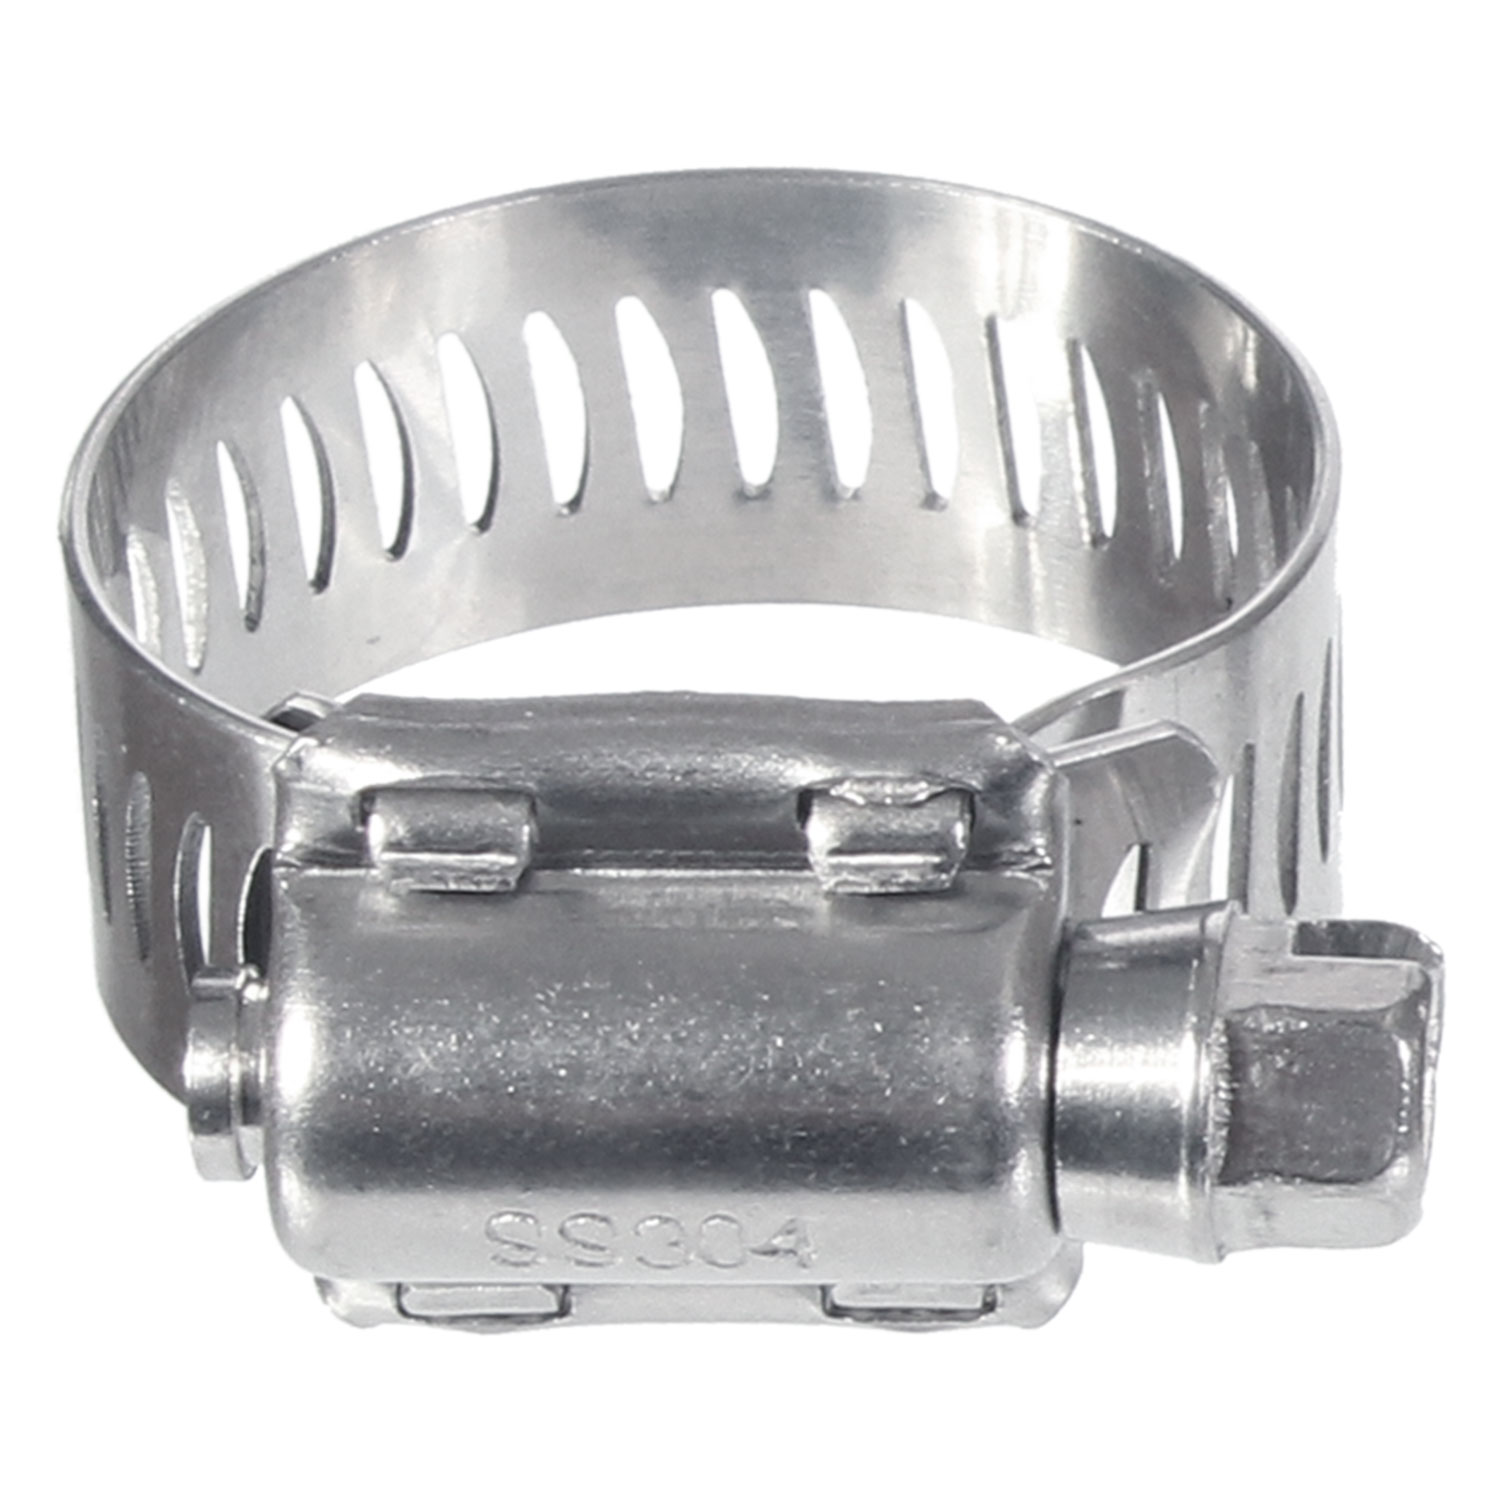 Stainless Steel Collar for 3/4", 1", 1¼", 1½" tubing